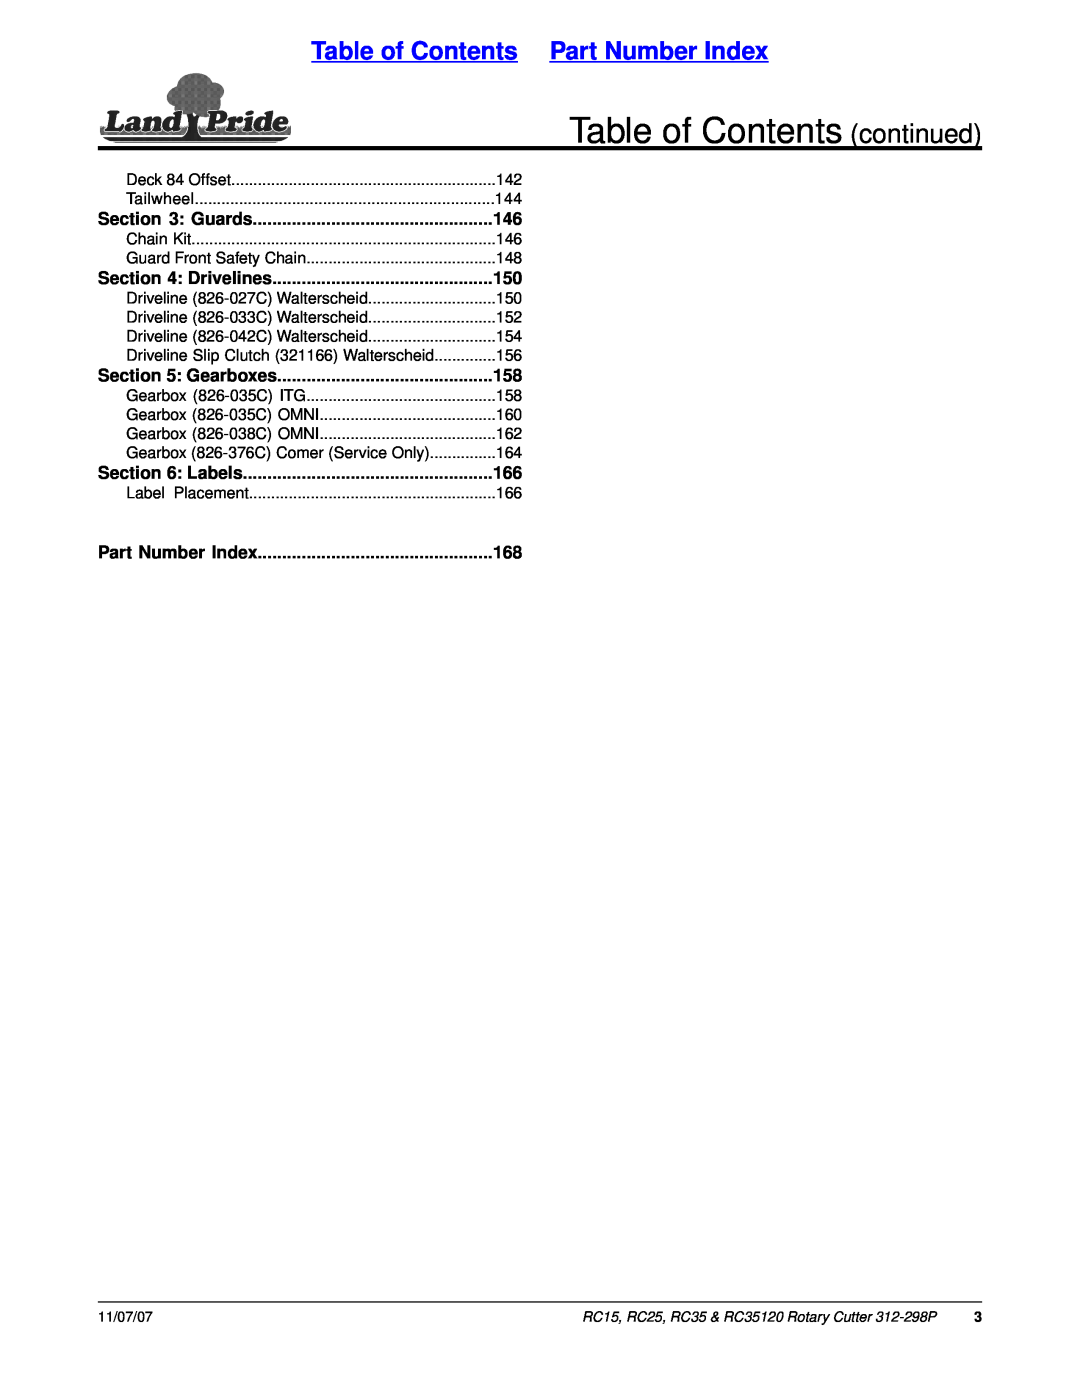 Land Pride RC15 Table of Contents continued, Table of Contents Part Number Index, Guards, Drivelines, Gearboxes, Labels 